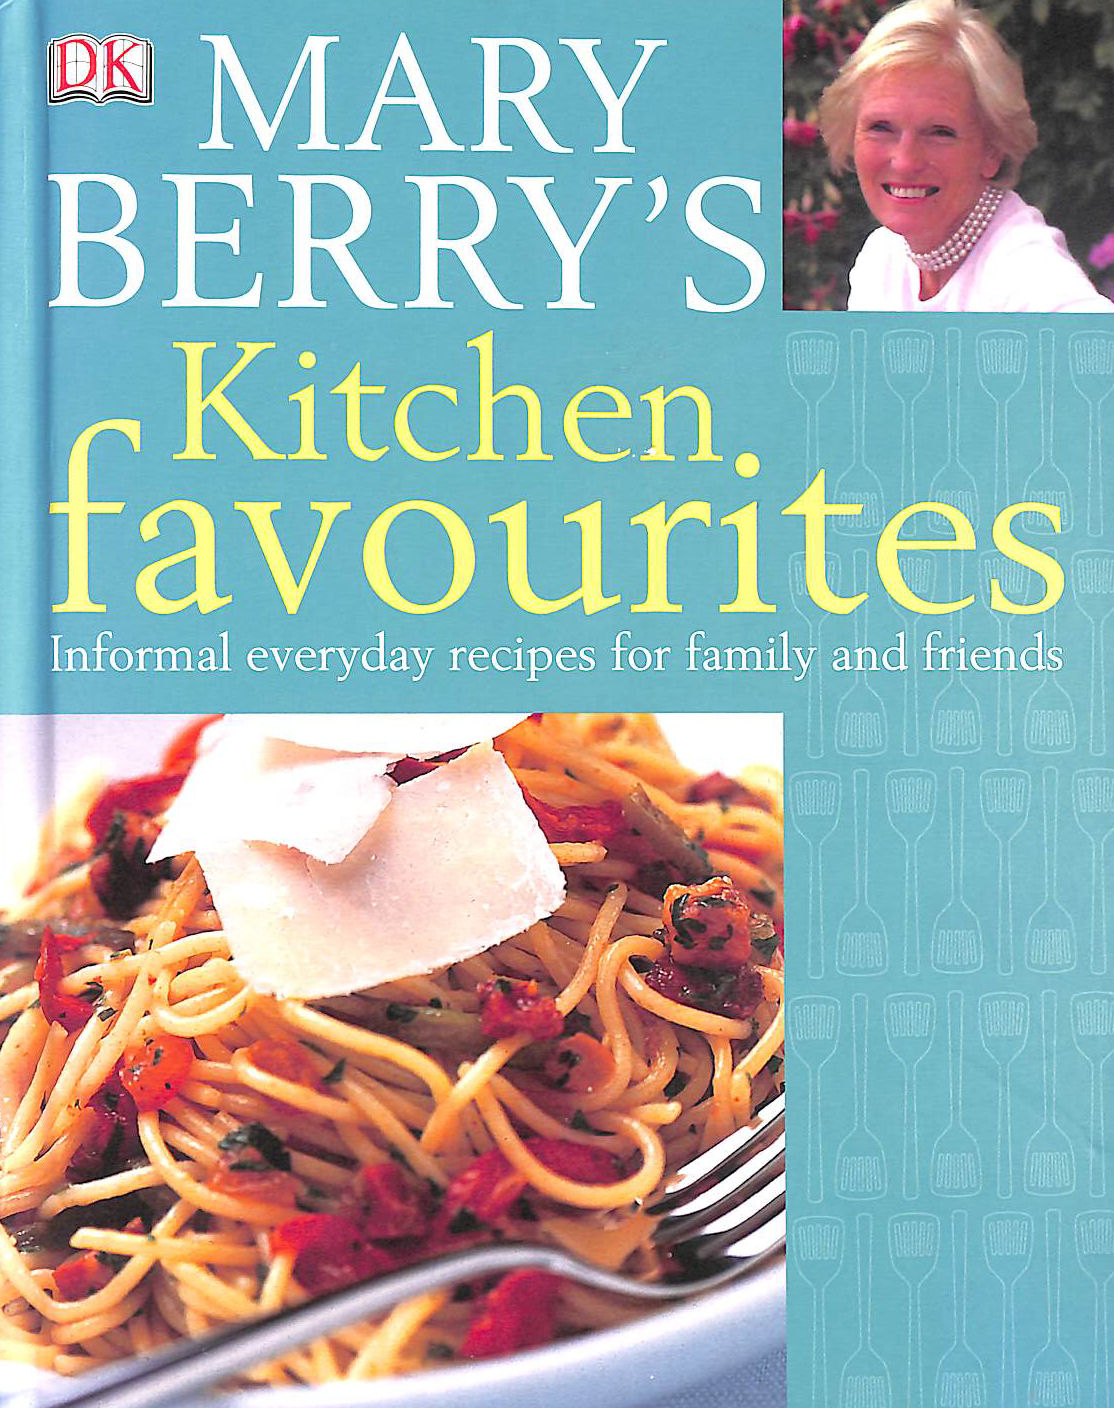 BERRY, MARY - Mary Berry's Kitchen Favourites: Informal everyday recipes for family and friends